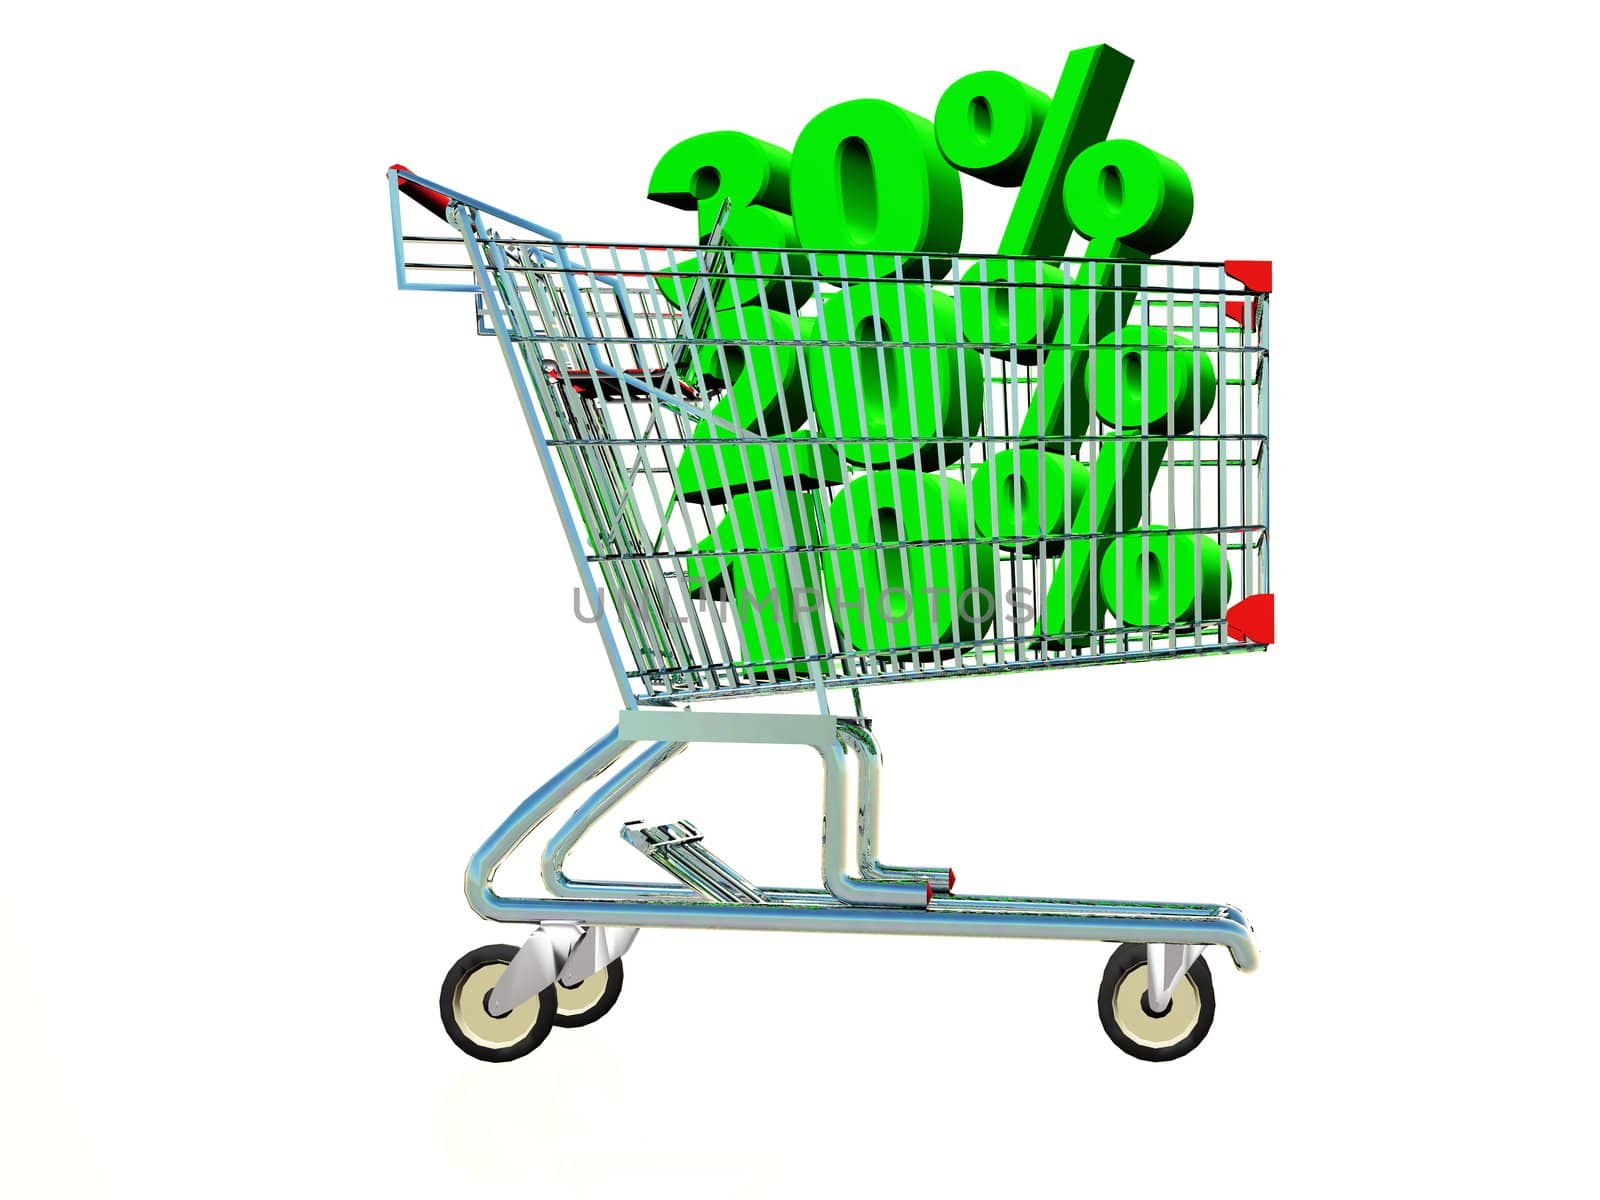 a shopping cart with % inside